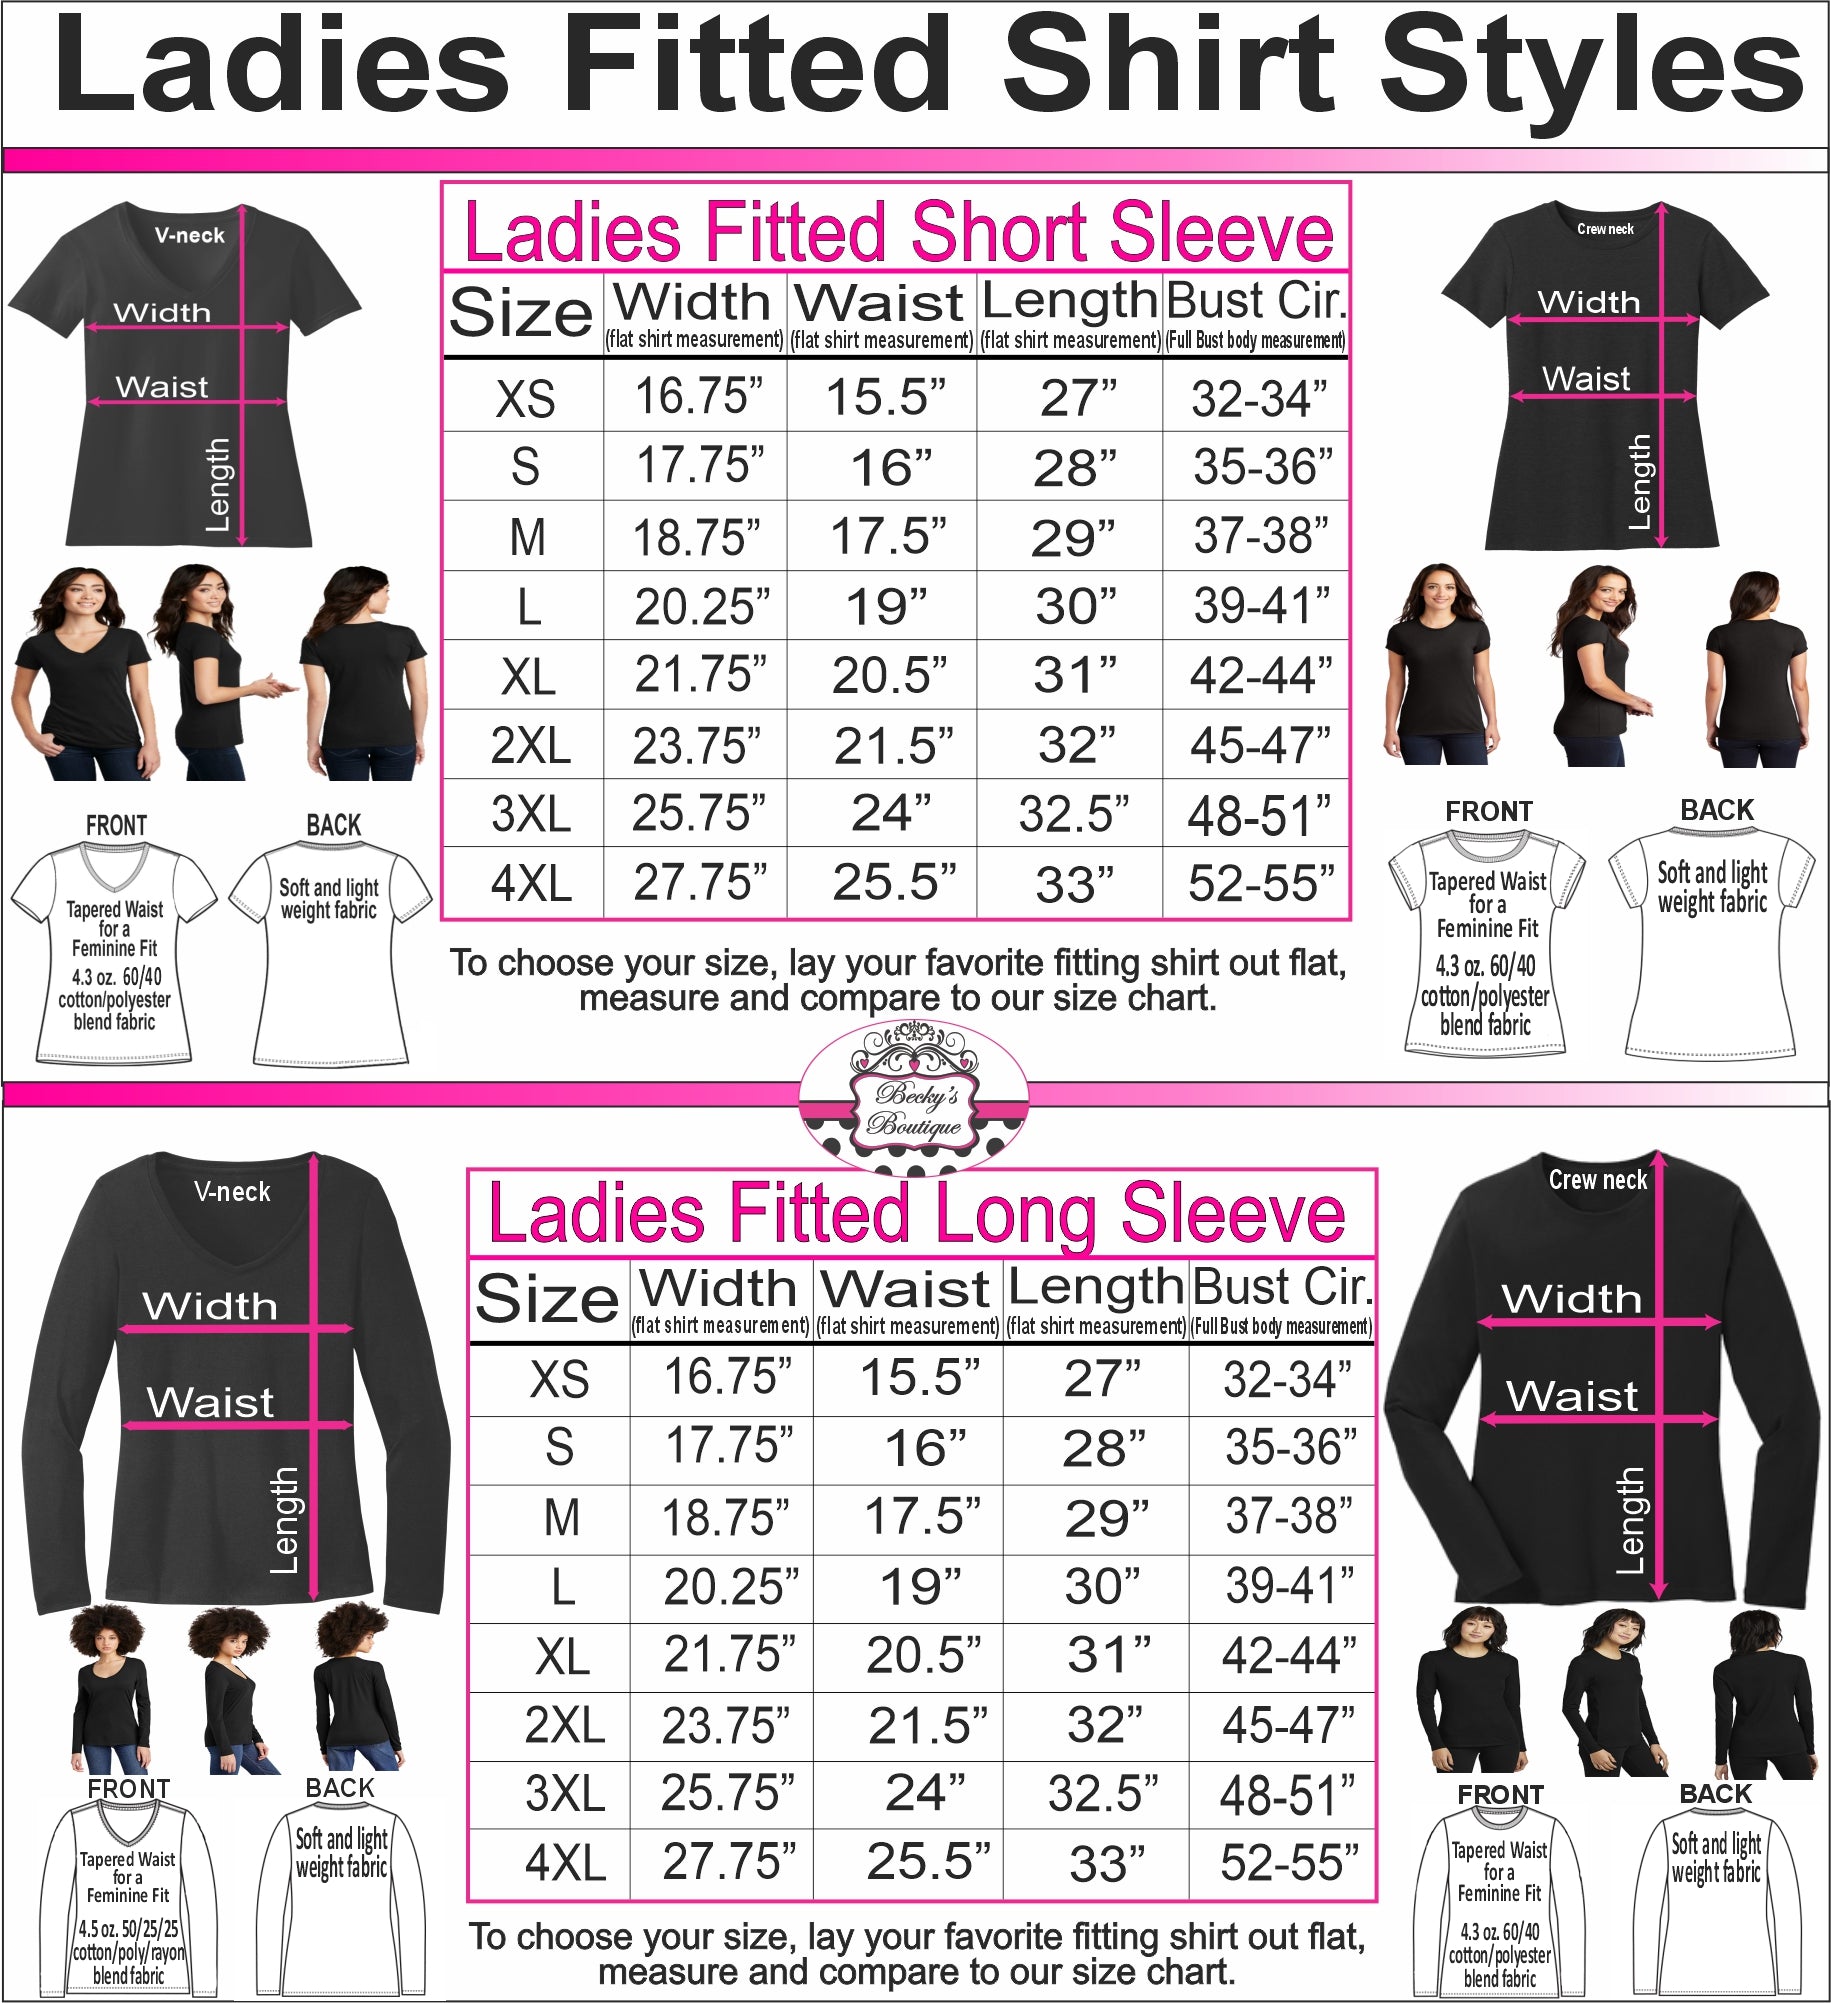 Ladies Fitted Vneck and Crew neck Short Sleeve and Long Sleeve Size Charts for Becky's Boutique